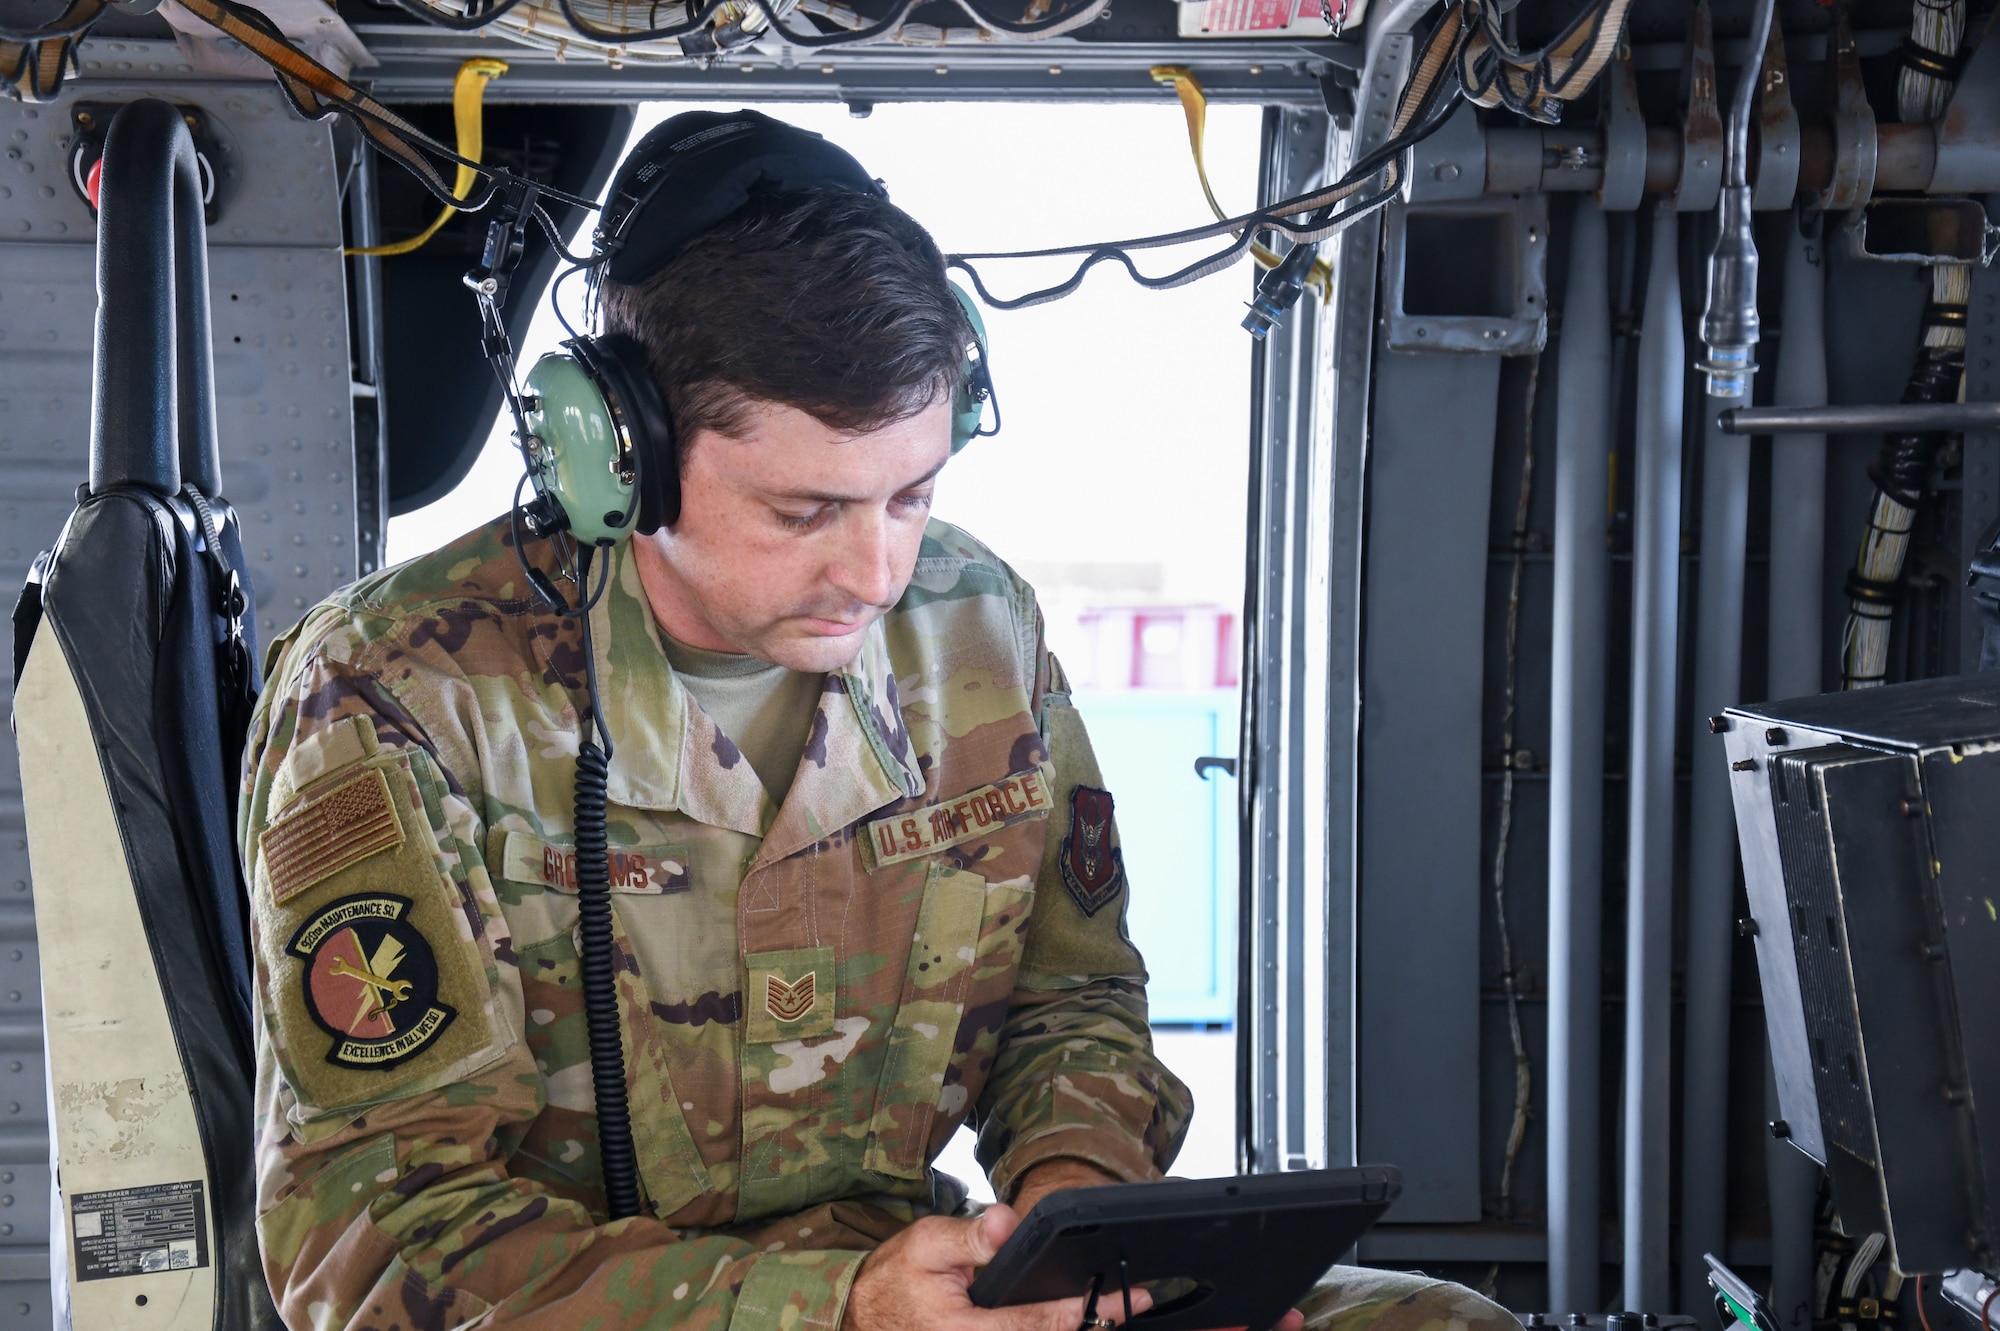 Technical Sgt. Gordon Grooms, 920th Maintenance Squadron maintainer, checks the automated flight control systems on an HH-60G Pave Hawk at Patrick Space Force Base, Florida, June 30, 2022. The 920th MXS preforms phase inspections to ensure the HH-60G Pave Hawks preform safely and effectively. (U.S. Air Force photo by Staff Sgt. Darius Sostre-Miroir)